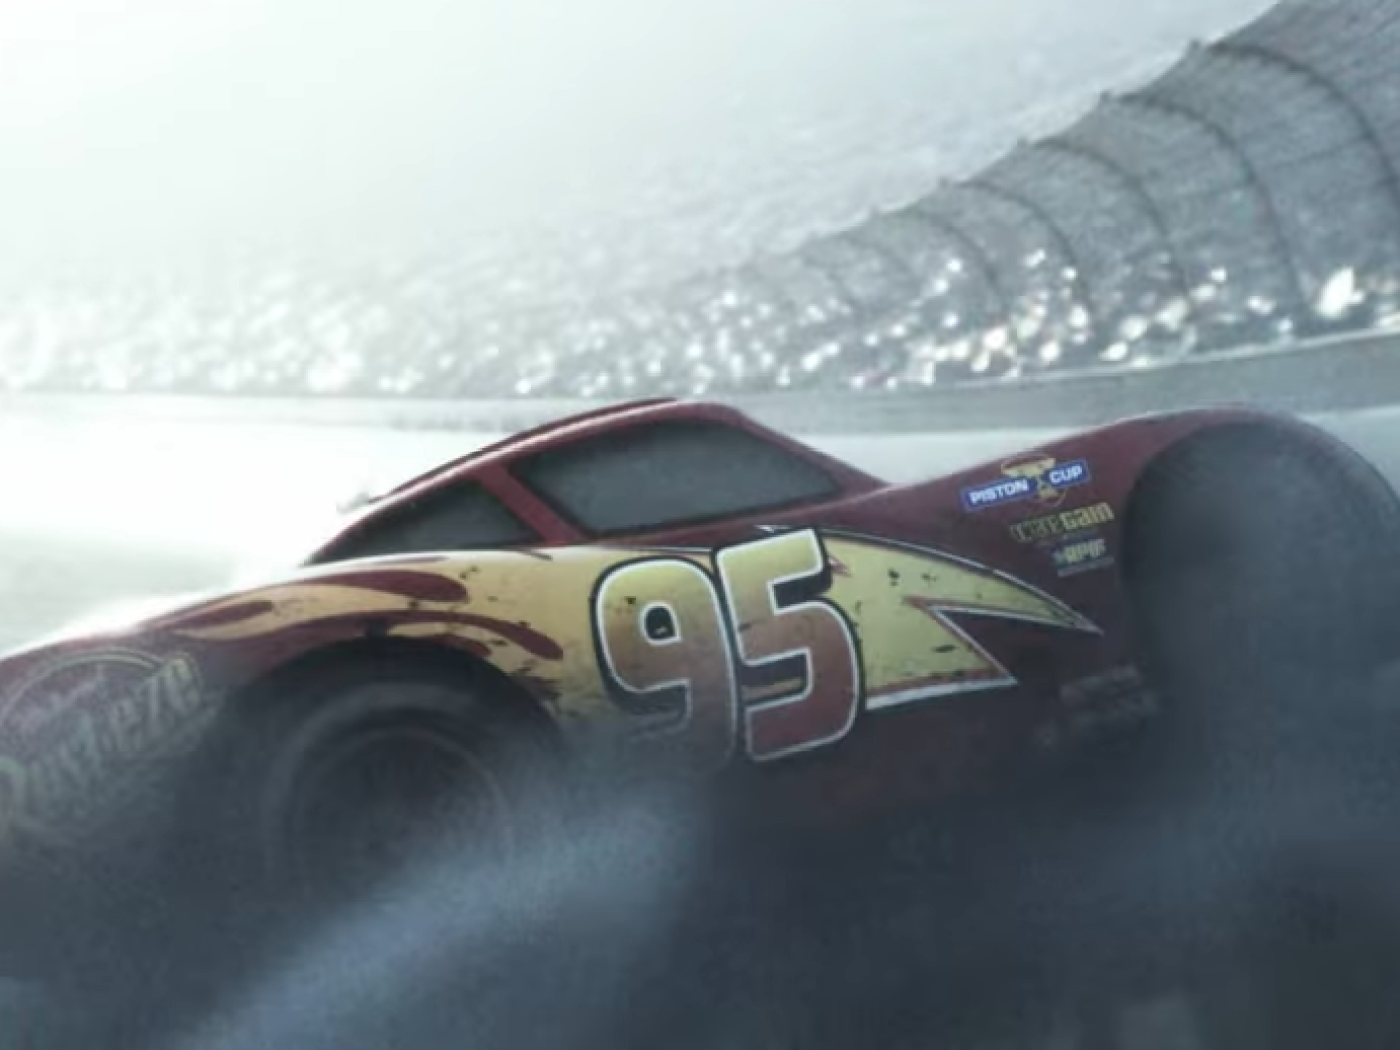 A dark, heart-pounding 'Cars 3' trailer signals attempt to put the  franchise back on track